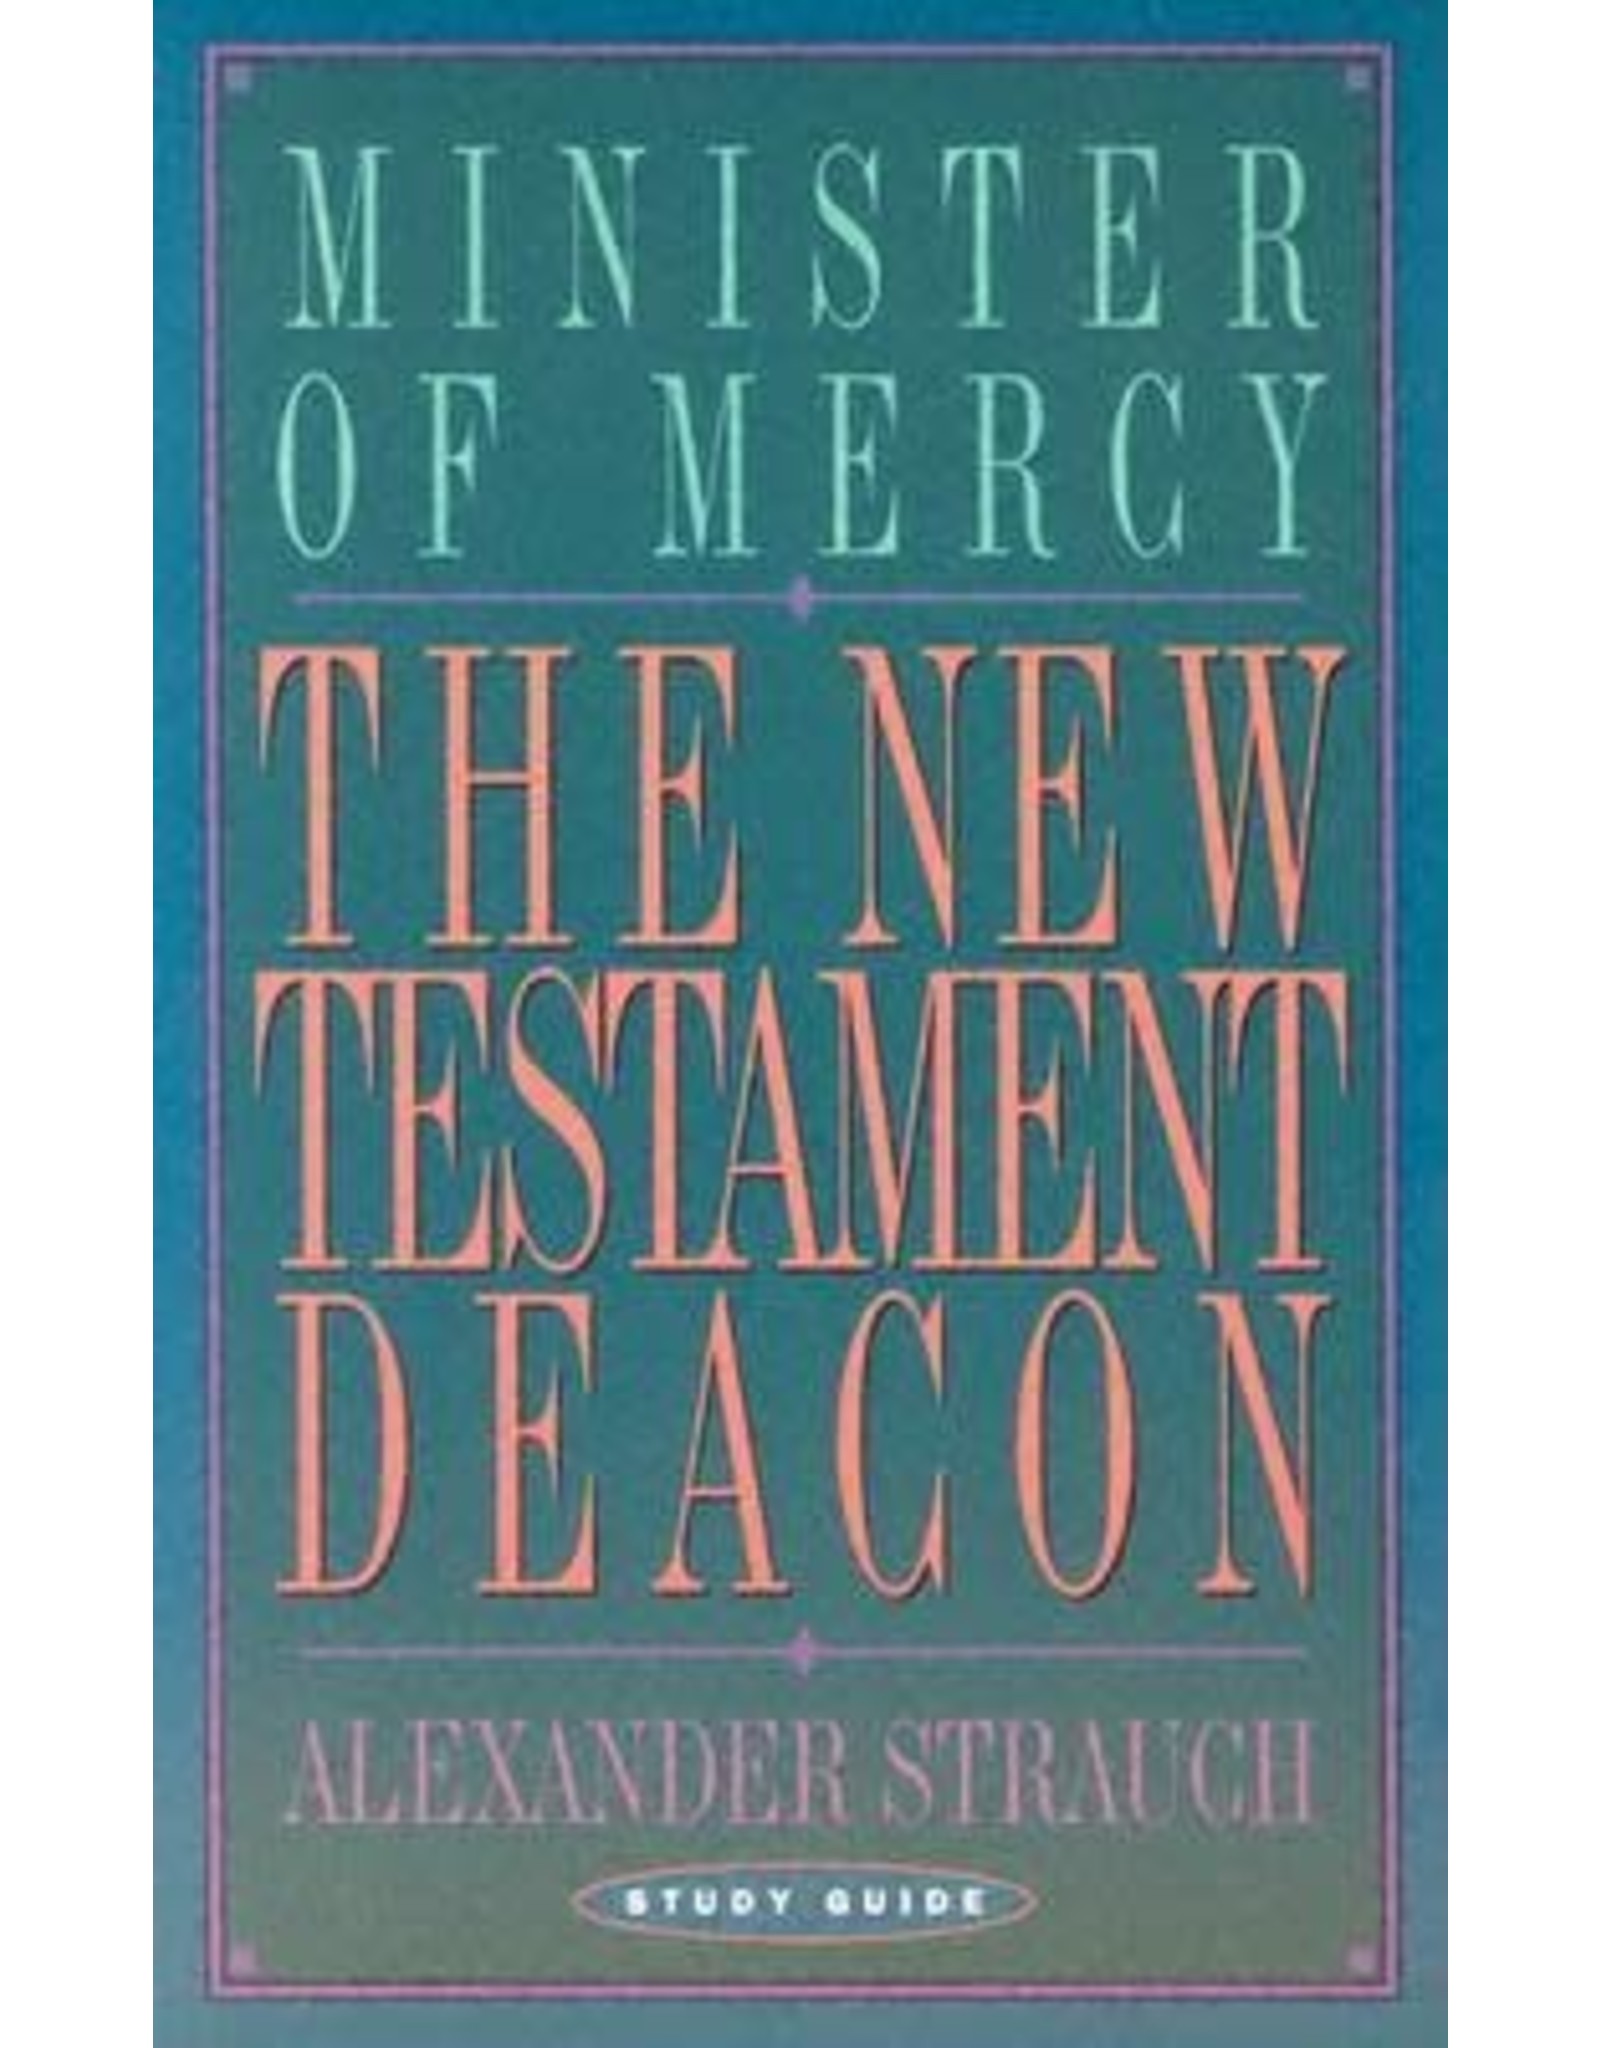 Alexander Strauch The New Testament Deacon Study Guide